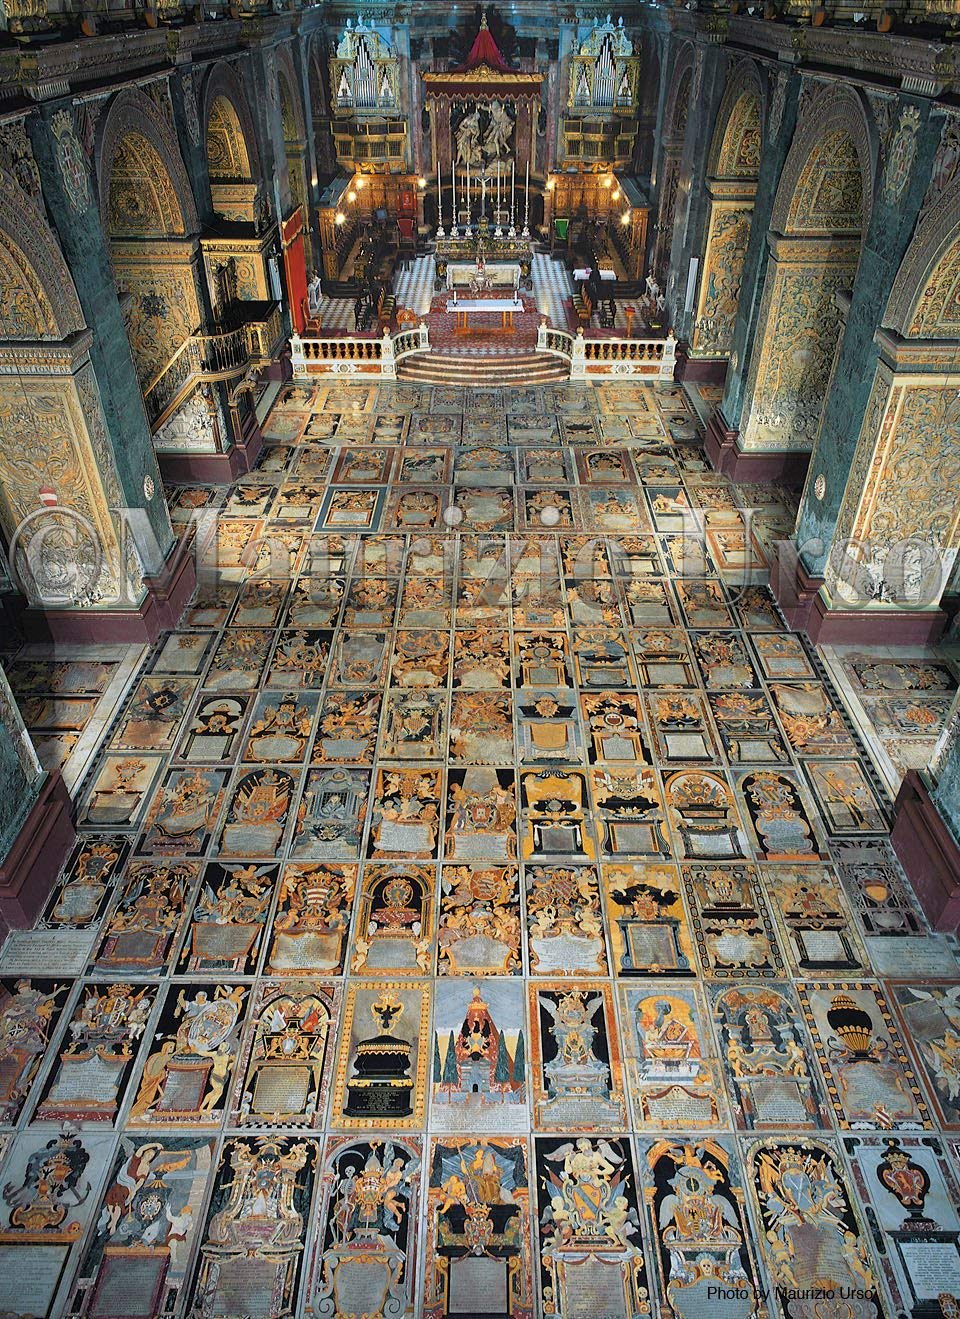 The floor of St. John's Co-Cathedral, in Malta, is composed of nearly 400 tombstones of Knights and officers of the Order of St. John of Jerusalem. Each tombstone is inlaid by a colored marble slab bearing the crest, coat-of-arms and epitaph of the noble knight